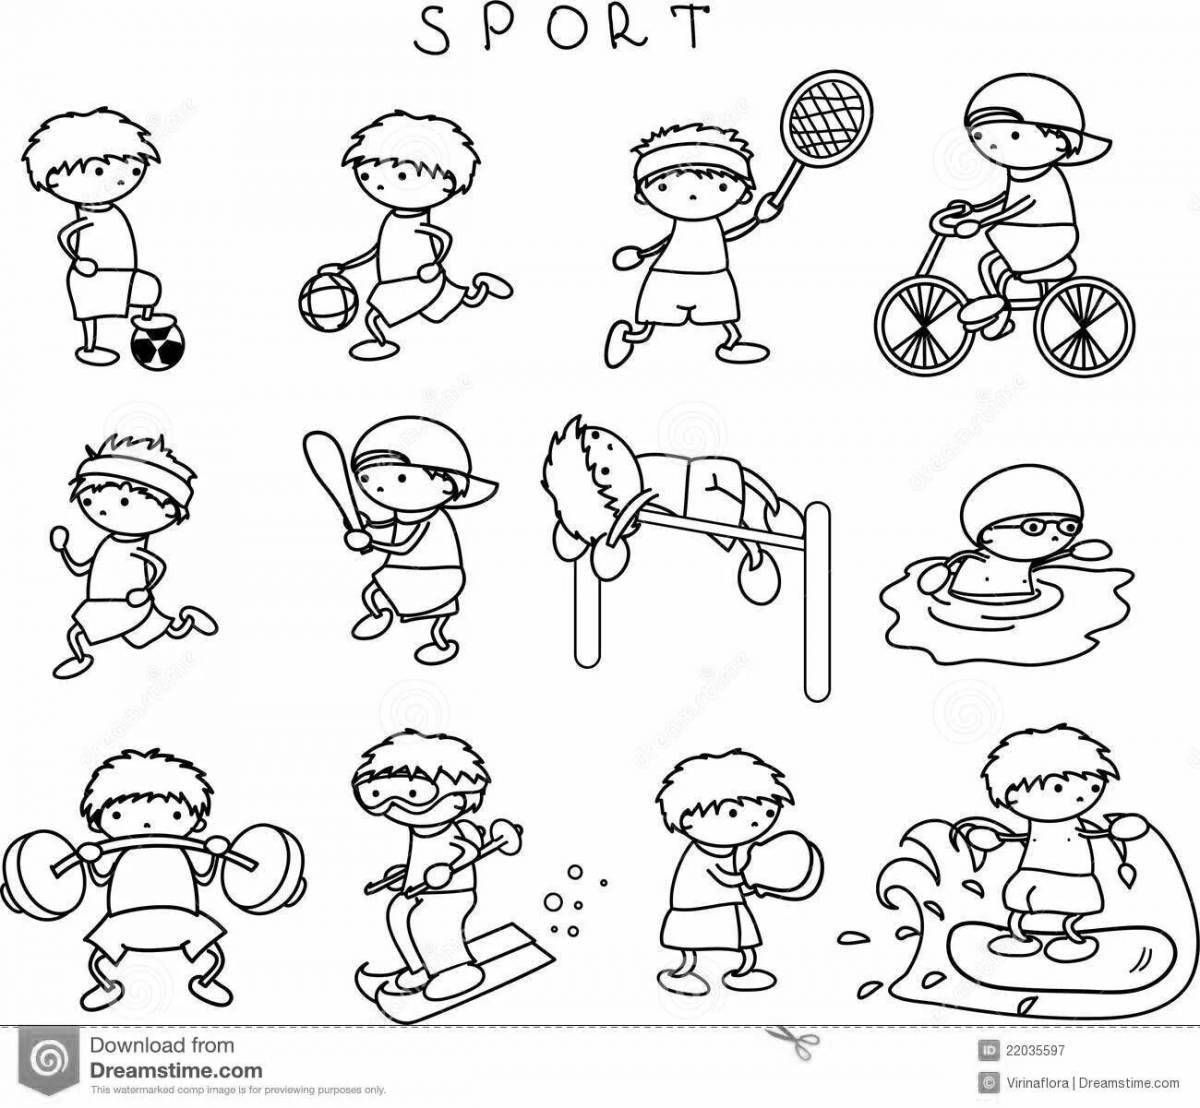 Athletes of different sports for children #11